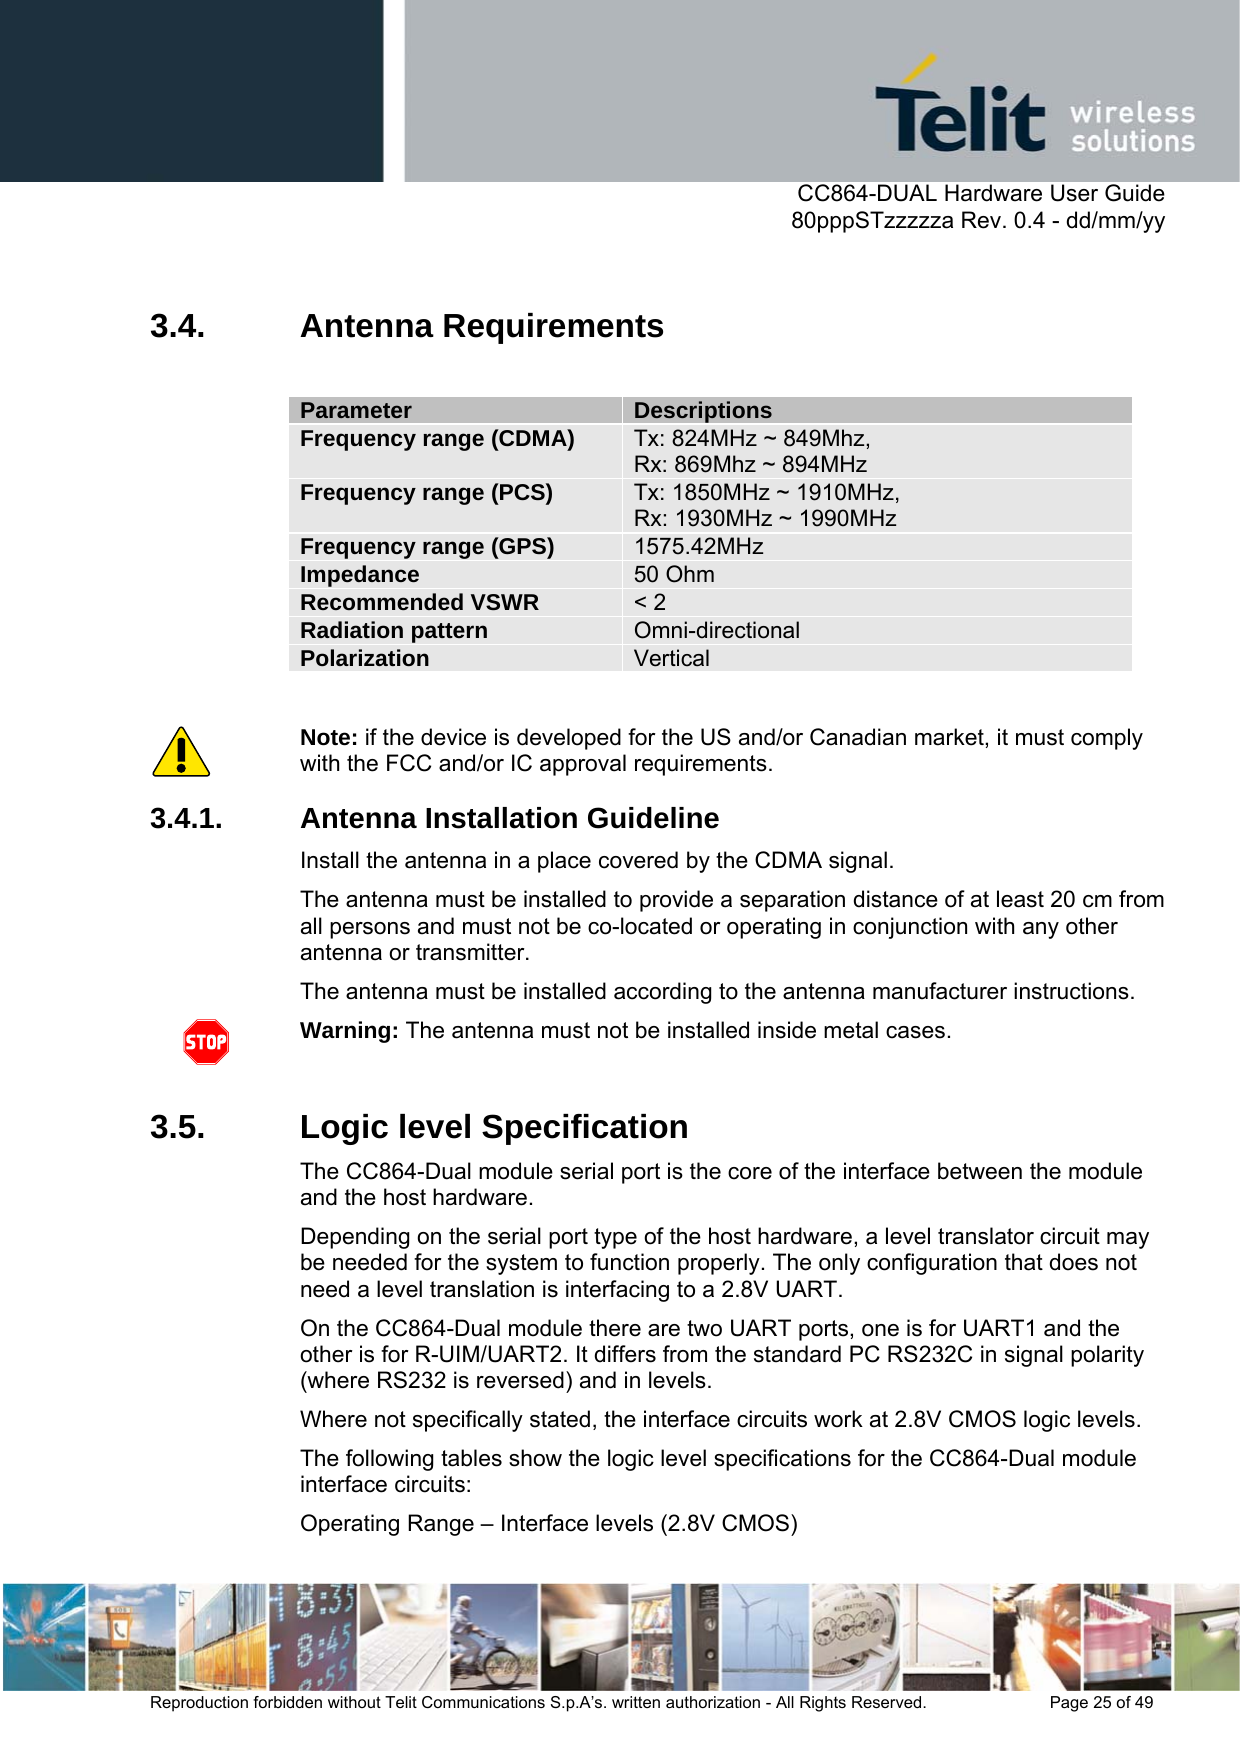      CC864-DUAL Hardware User Guide   80pppSTzzzzza Rev. 0.4 - dd/mm/yy   Reproduction forbidden without Telit Communications S.p.A’s. written authorization - All Rights Reserved.    Page 25 of 49   3.4. Antenna Requirements  Parameter  Descriptions Frequency range (CDMA)  Tx: 824MHz ~ 849Mhz,  Rx: 869Mhz ~ 894MHz Frequency range (PCS)  Tx: 1850MHz ~ 1910MHz,  Rx: 1930MHz ~ 1990MHz Frequency range (GPS)  1575.42MHz Impedance  50 Ohm Recommended VSWR  &lt; 2 Radiation pattern  Omni-directional Polarization  Vertical  Note: if the device is developed for the US and/or Canadian market, it must comply with the FCC and/or IC approval requirements. 3.4.1.  Antenna Installation Guideline Install the antenna in a place covered by the CDMA signal. The antenna must be installed to provide a separation distance of at least 20 cm from all persons and must not be co-located or operating in conjunction with any other antenna or transmitter. The antenna must be installed according to the antenna manufacturer instructions.  Warning: The antenna must not be installed inside metal cases.  3.5.  Logic level Specification The CC864-Dual module serial port is the core of the interface between the module and the host hardware.  Depending on the serial port type of the host hardware, a level translator circuit may be needed for the system to function properly. The only configuration that does not need a level translation is interfacing to a 2.8V UART. On the CC864-Dual module there are two UART ports, one is for UART1 and the other is for R-UIM/UART2. It differs from the standard PC RS232C in signal polarity (where RS232 is reversed) and in levels.  Where not specifically stated, the interface circuits work at 2.8V CMOS logic levels.  The following tables show the logic level specifications for the CC864-Dual module interface circuits: Operating Range – Interface levels (2.8V CMOS) 